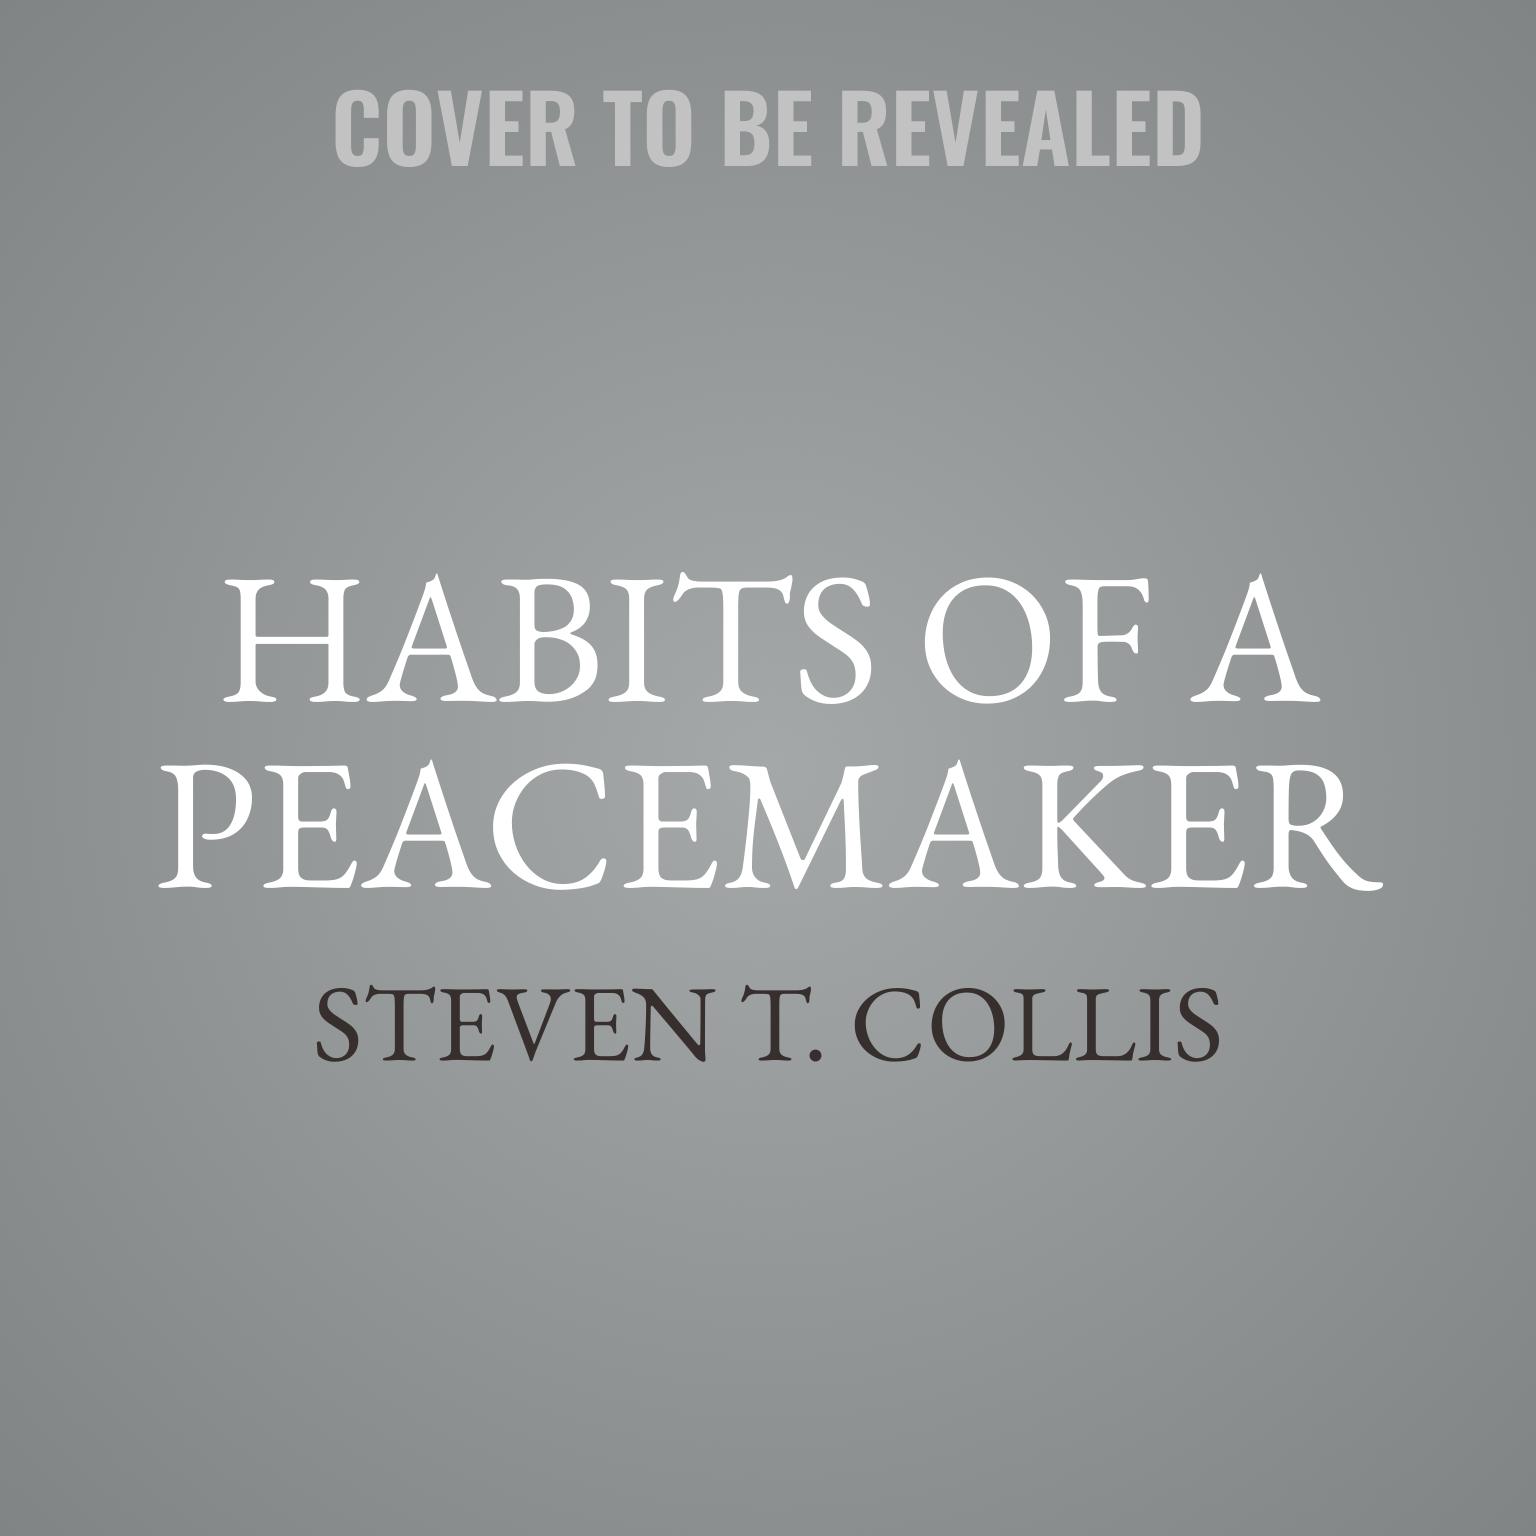 Habits of a Peacemaker: 10 Habits to Change Our Potentially Toxic Conversations into Healthy Dialogues Audiobook, by Steven T. Collis